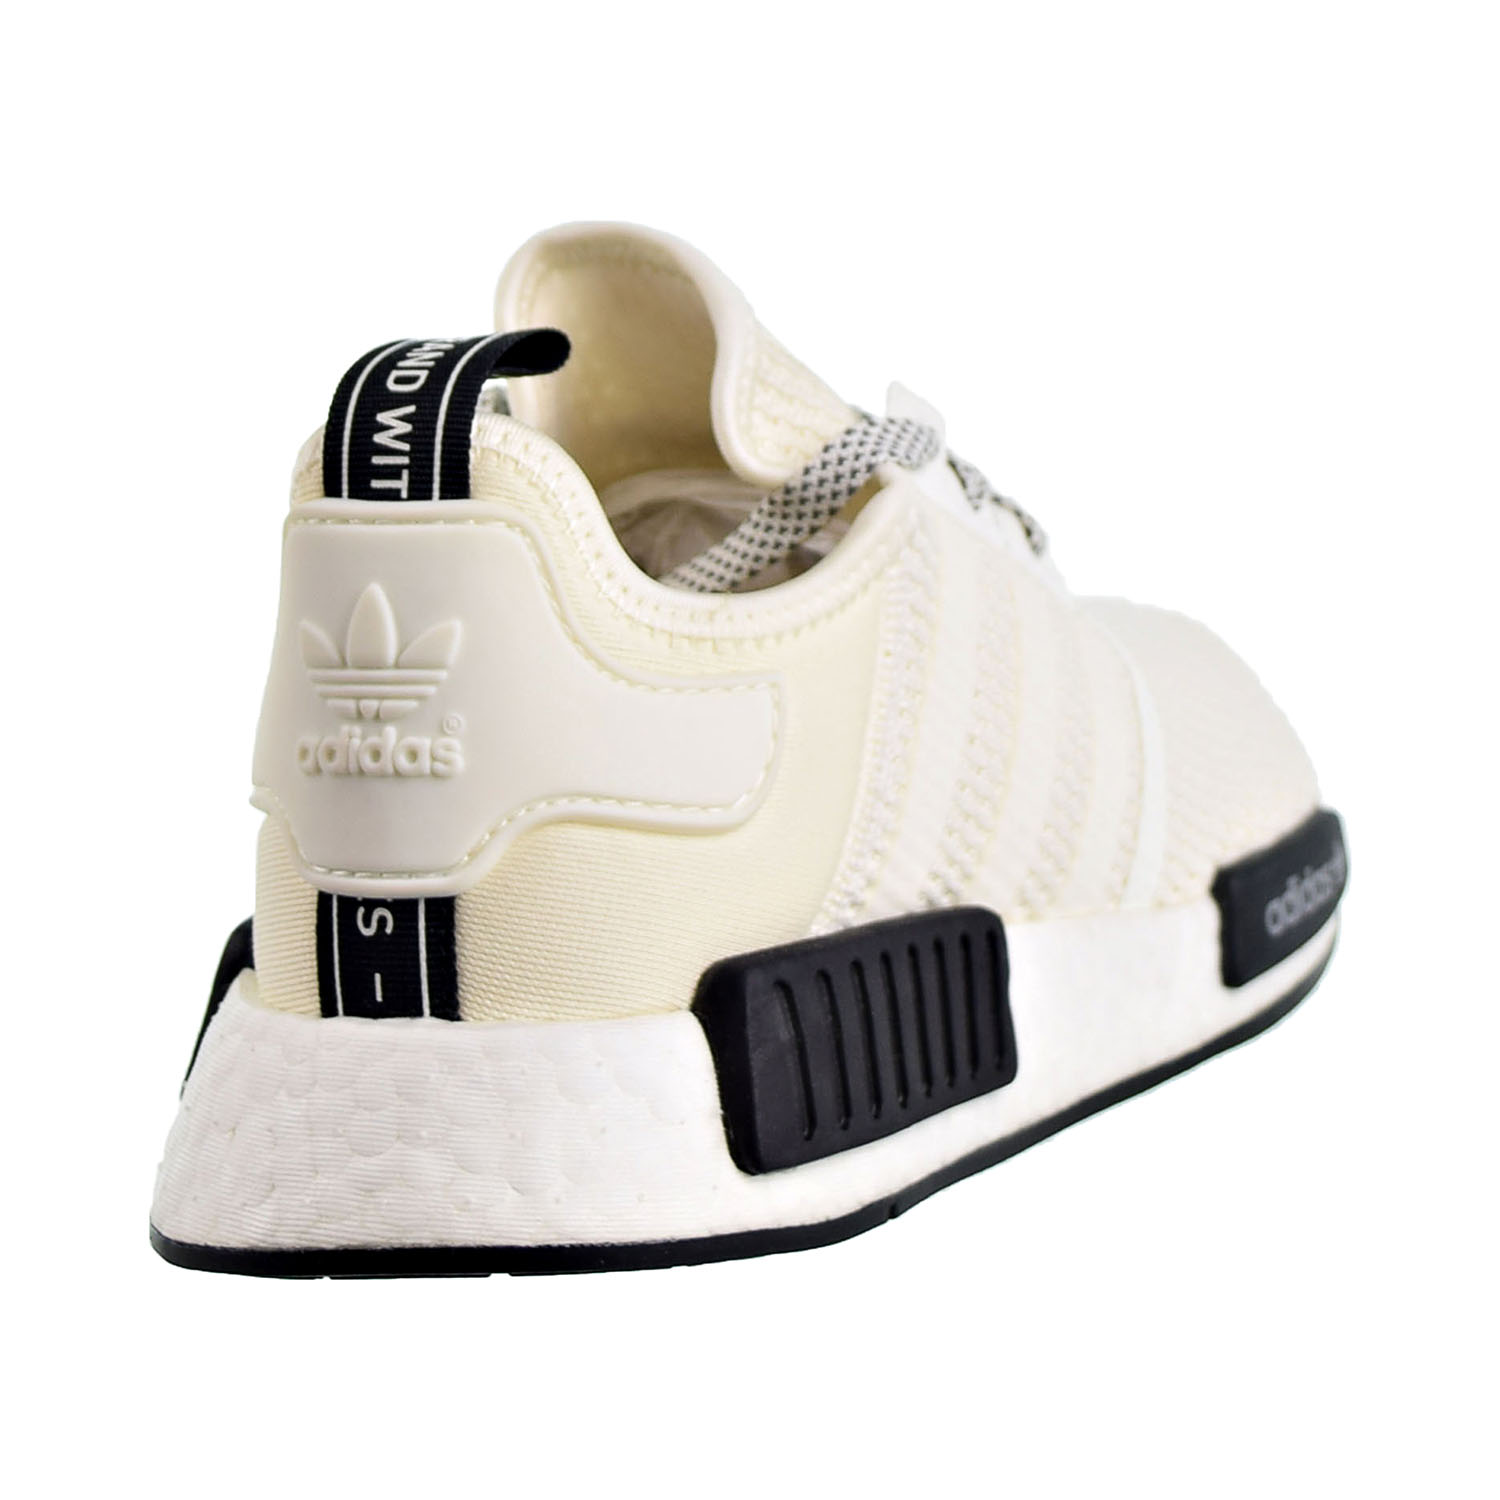 adidas nmd r1 off white carbon core black